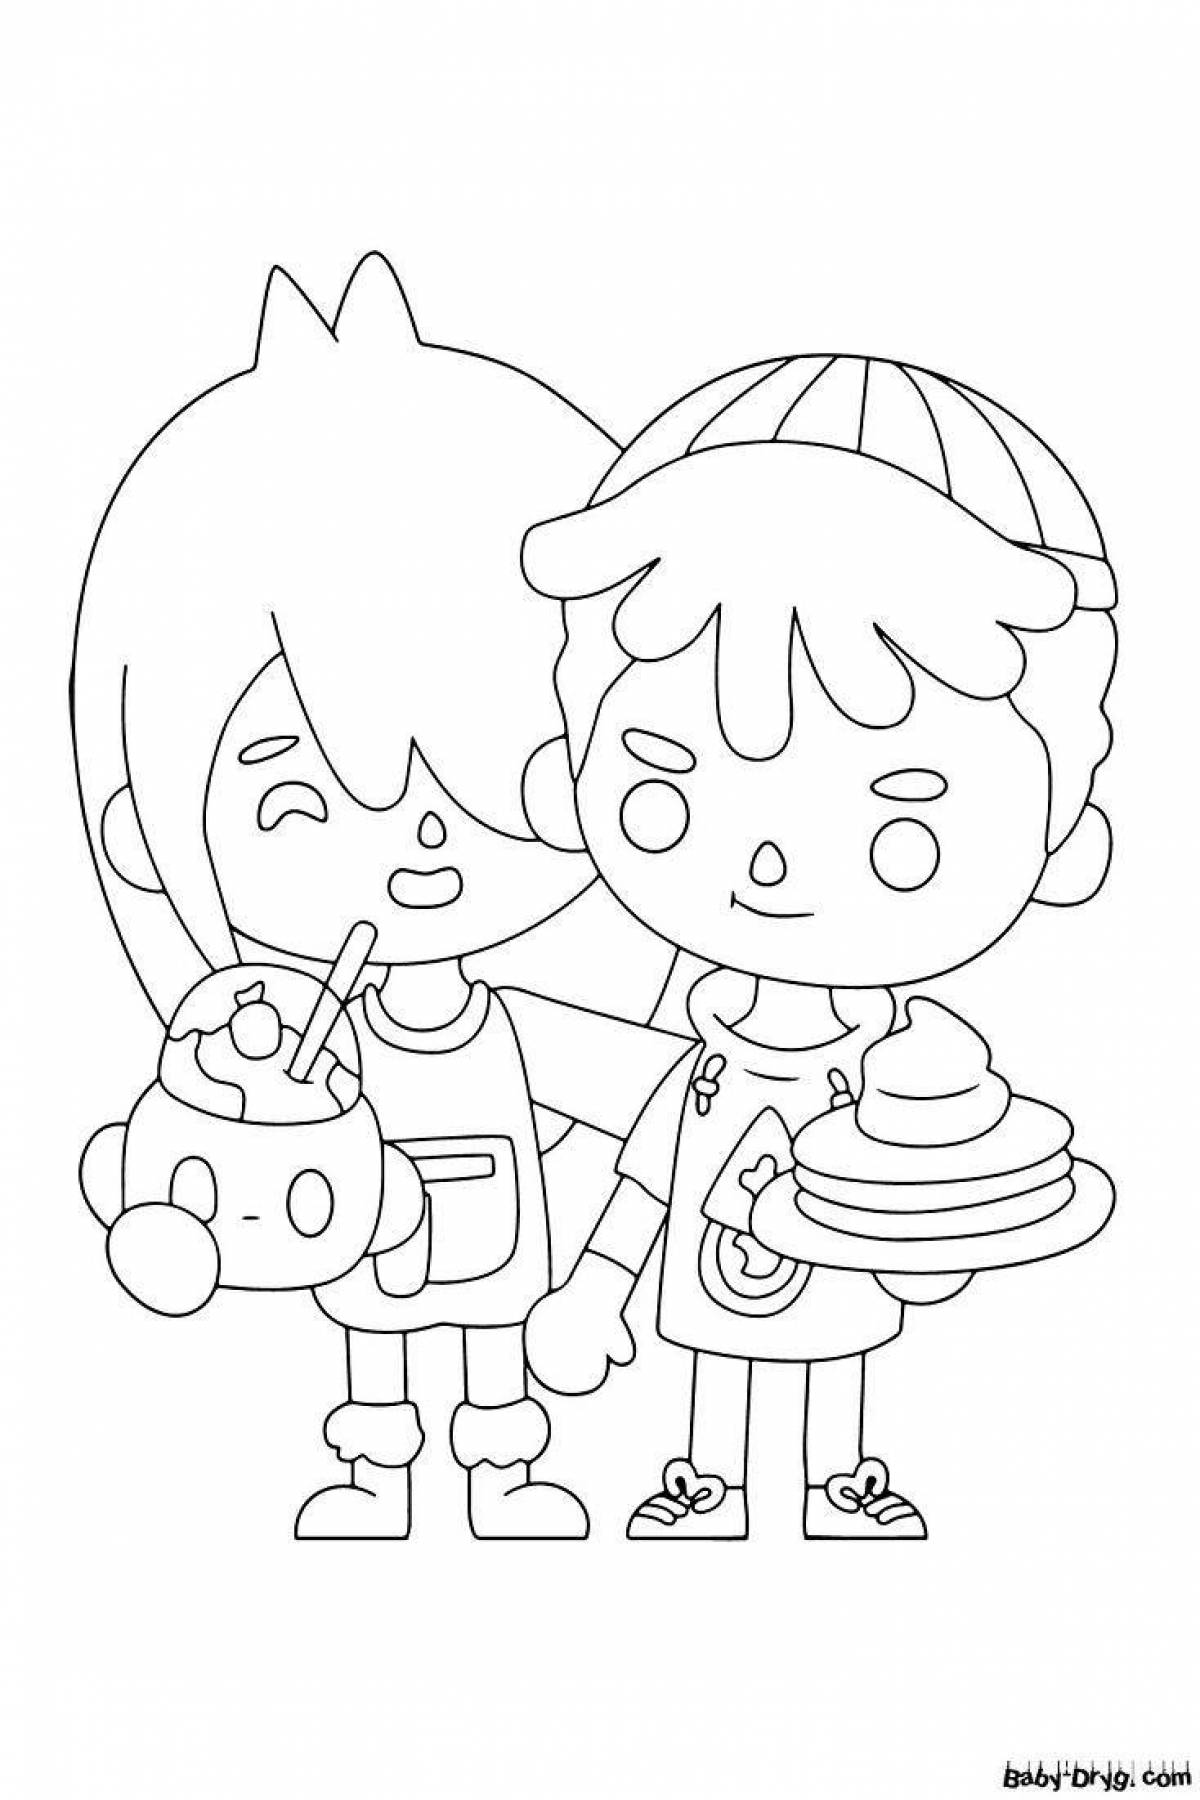 Lovely toca life world coloring page